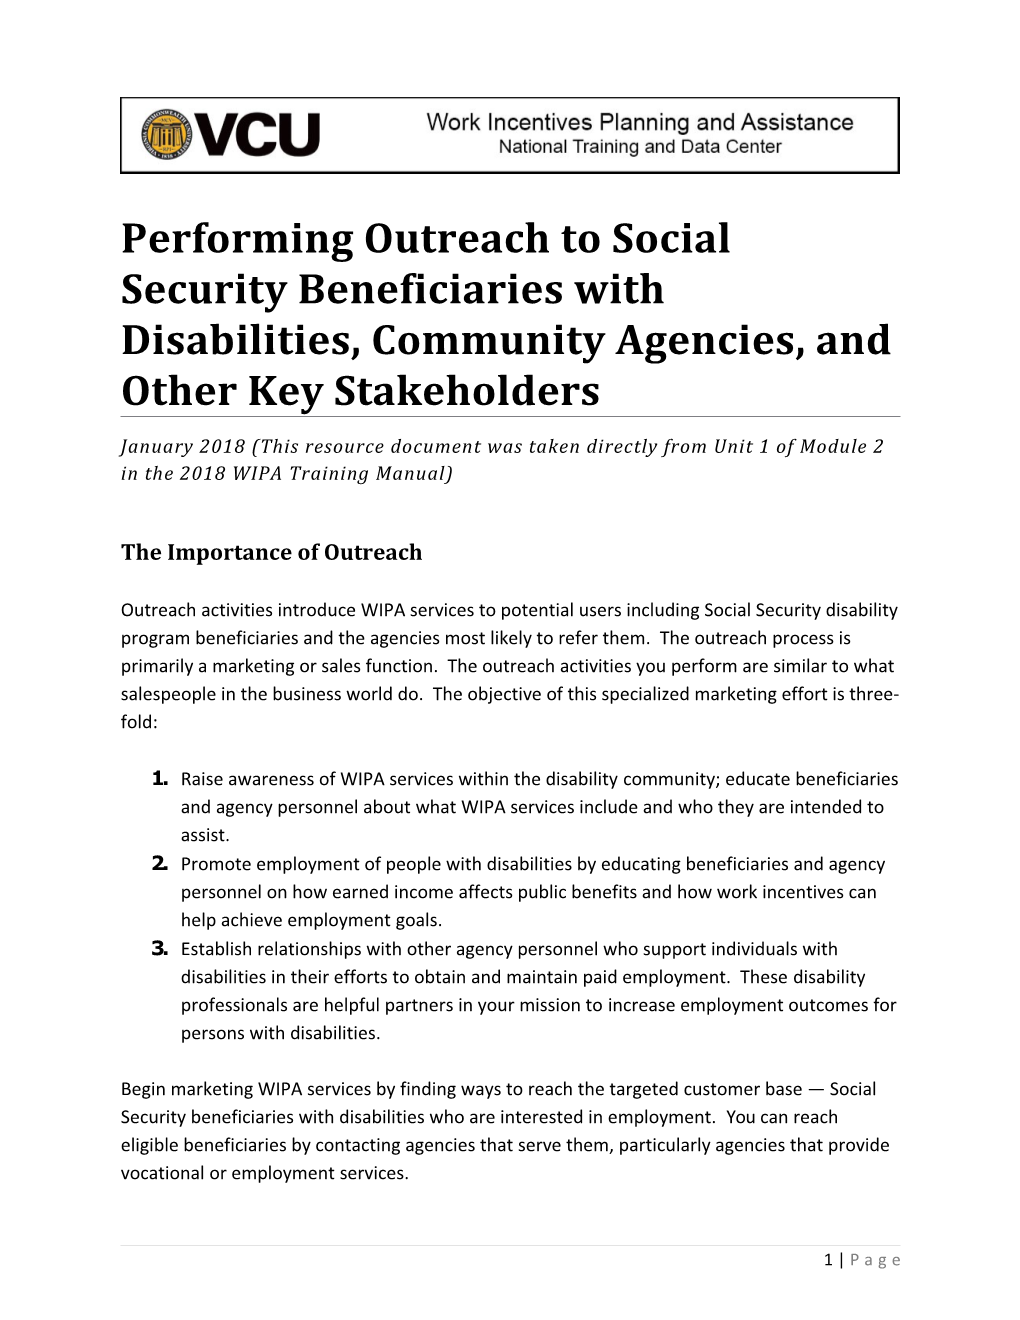 Performing Outreach to Social Security Beneficiaries with Disabilities, Community Agencies